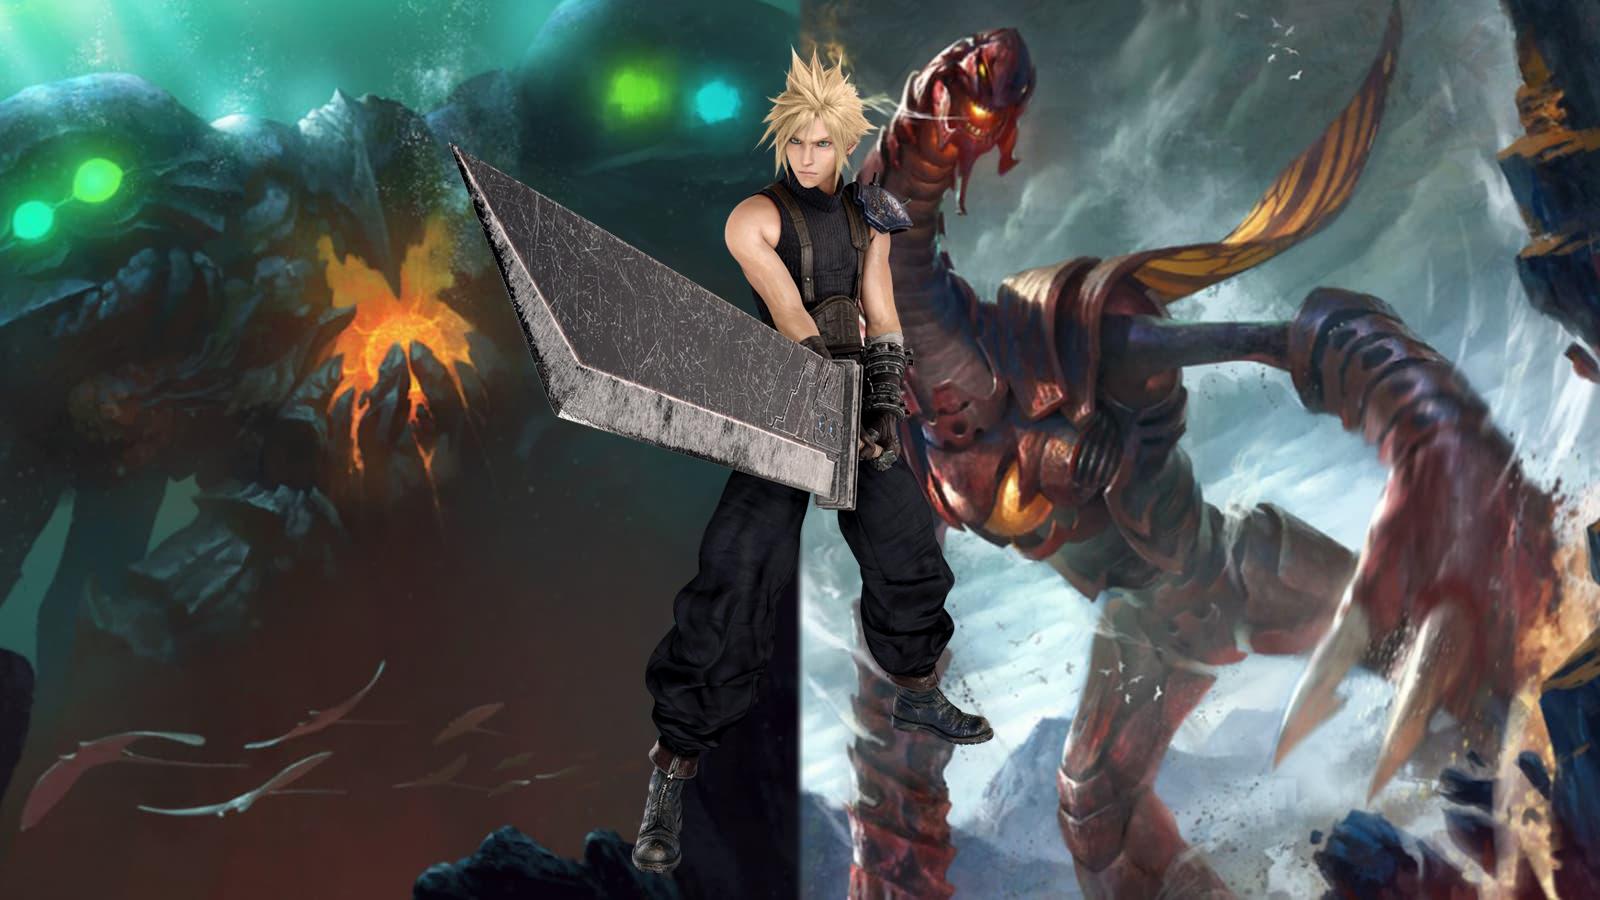 Cloud Strife from Final Fantasy VII Remake in front of emerald and ruby weapon